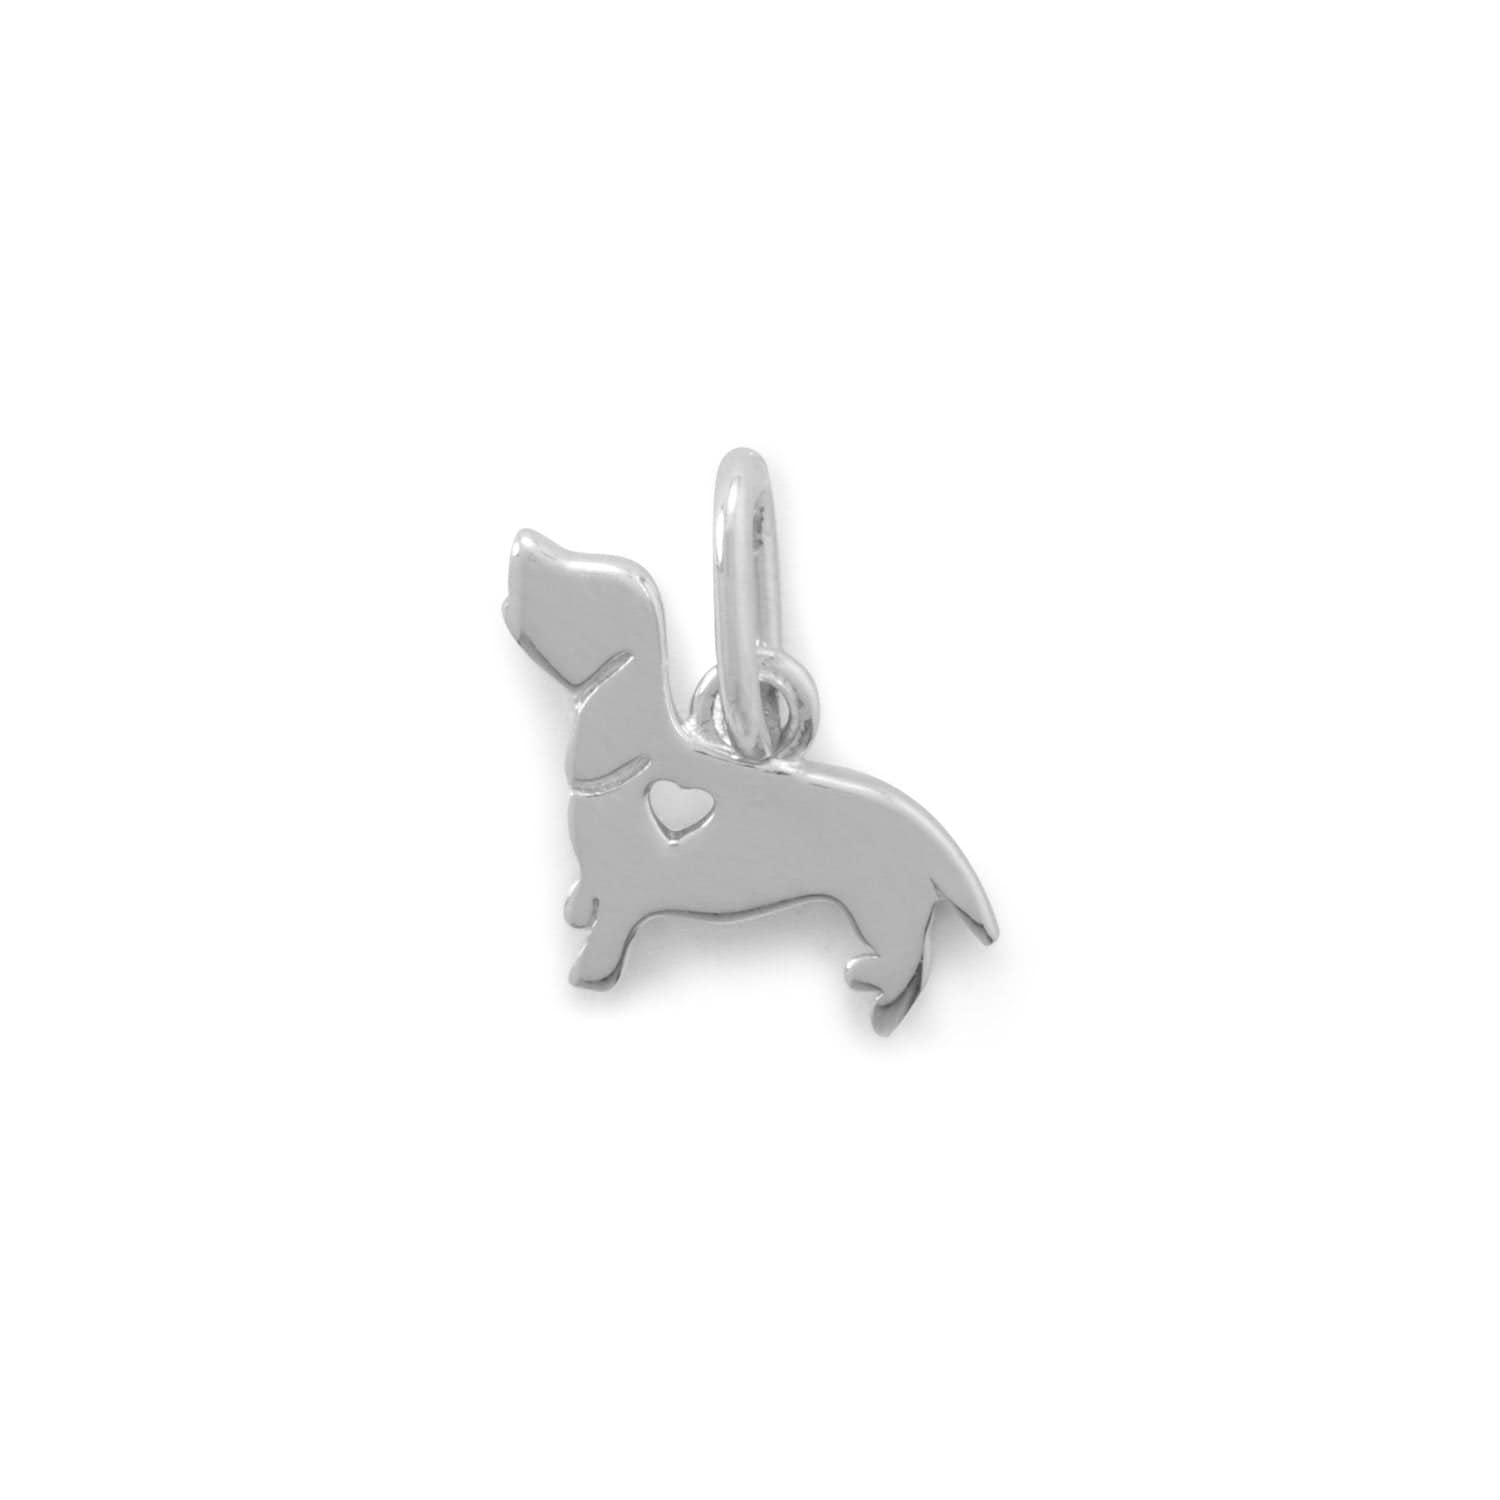 Dachshund with Heart Sterling Silver Charm-Cutest Doxie! - The Pink Pigs, A Compassionate Boutique